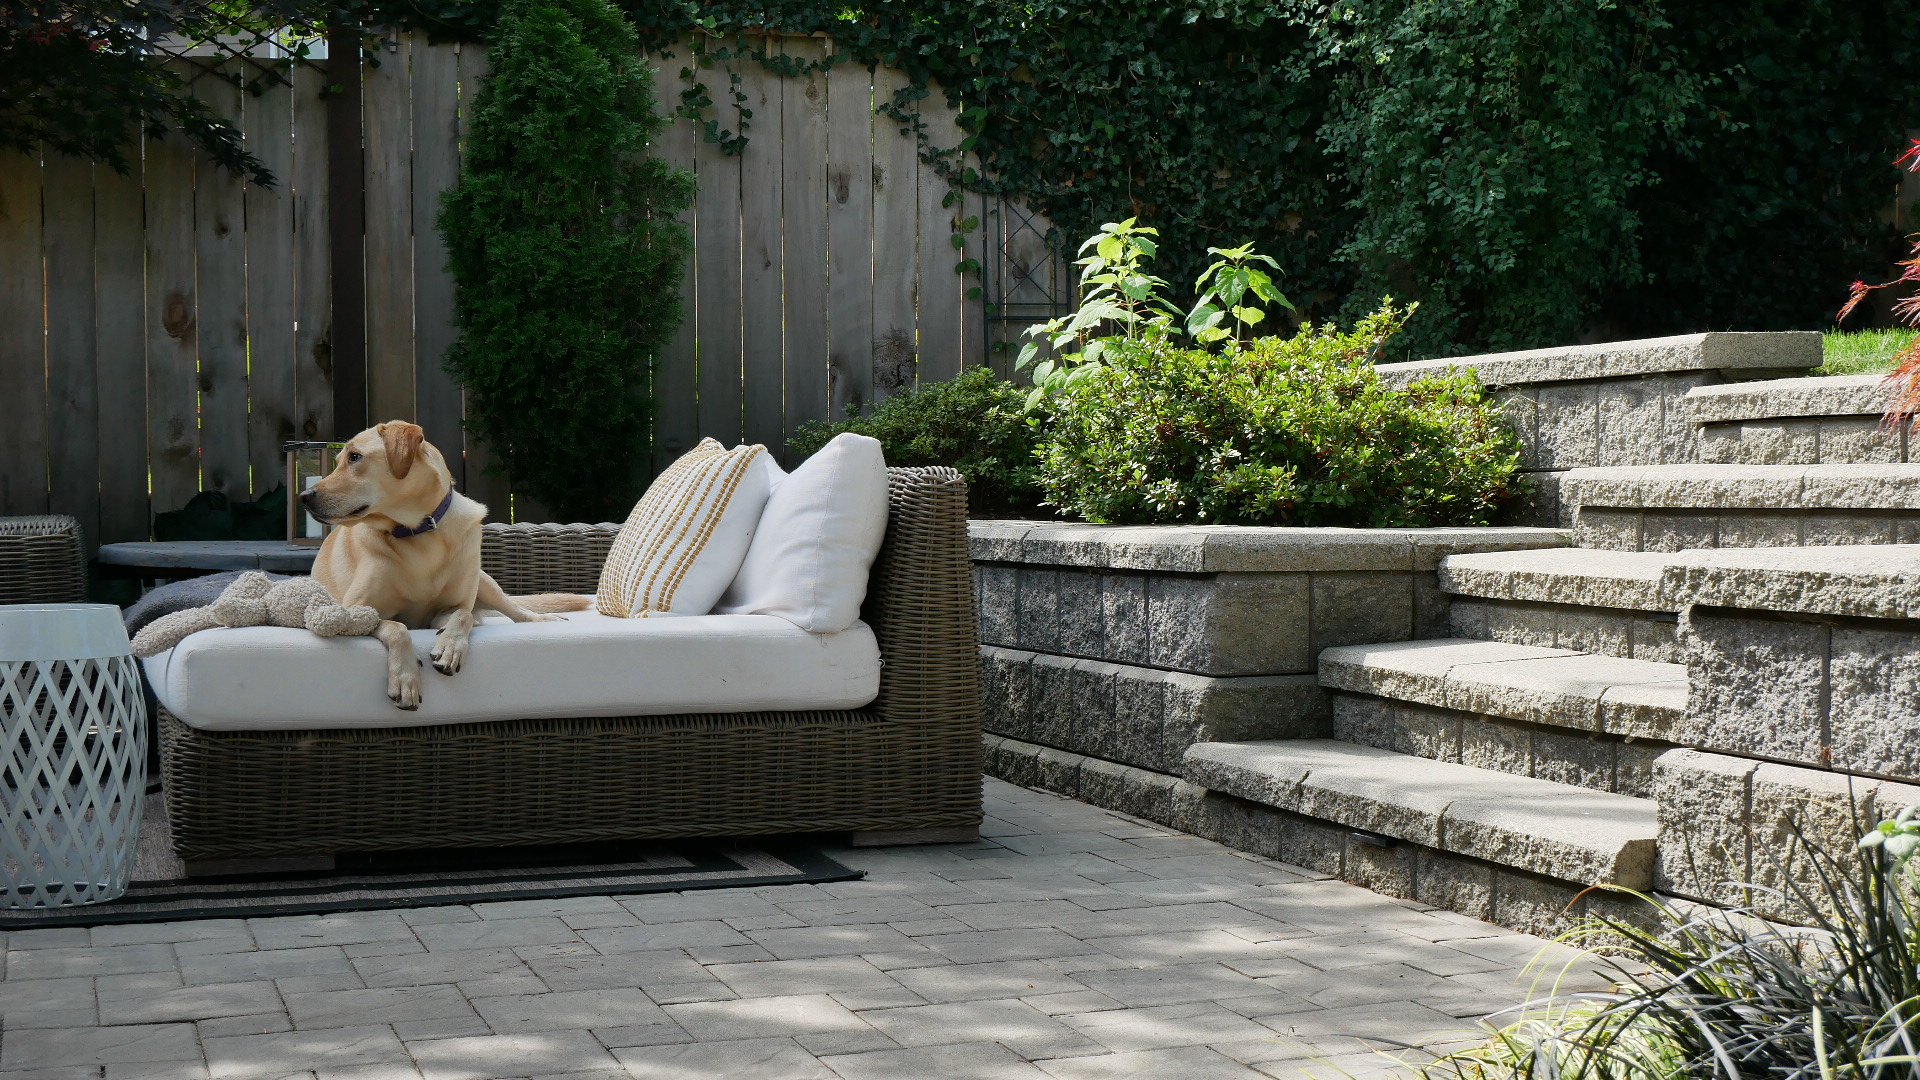 dog on outdoor patio couch with retaining wall and pavers